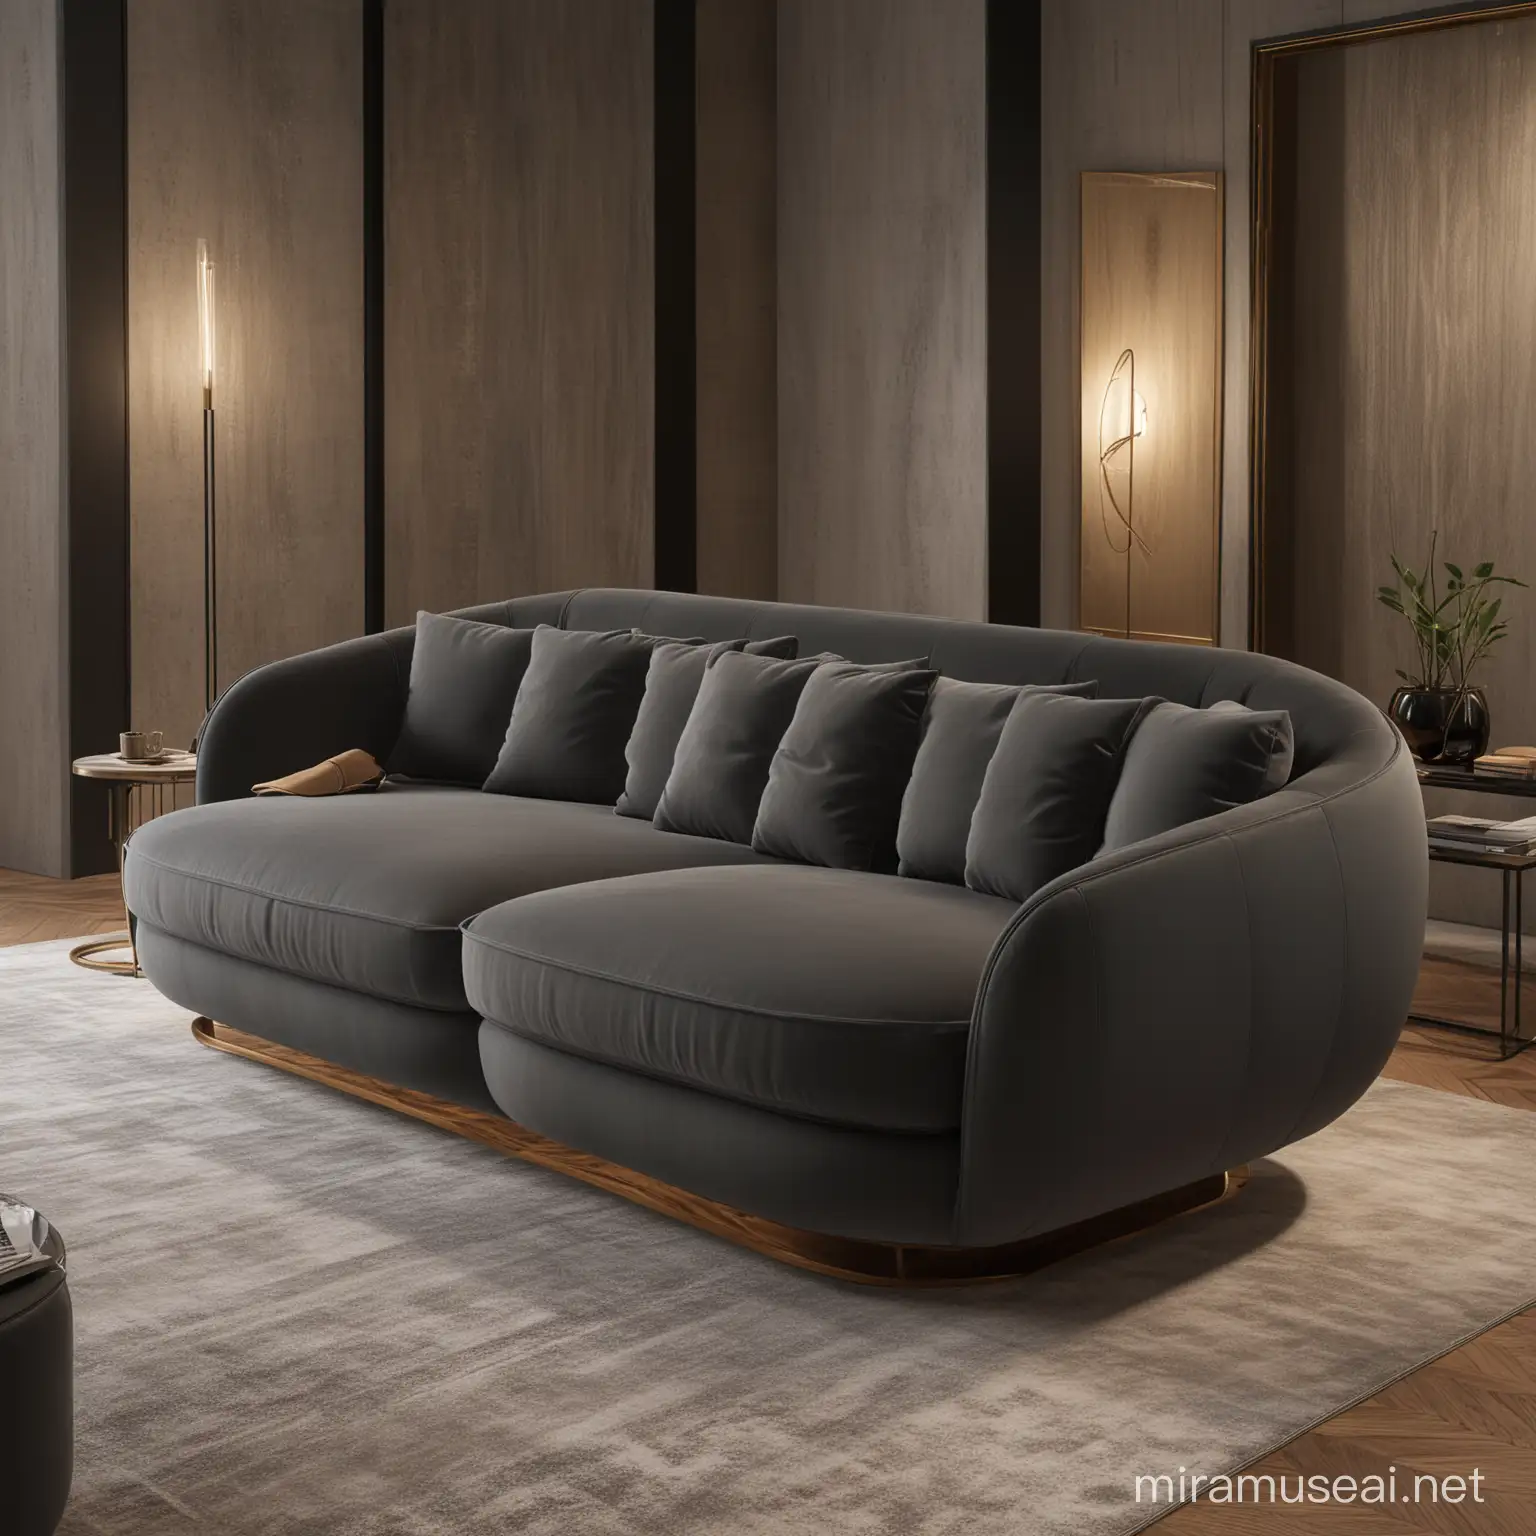 Elegant Sofa Design with Fine Wood Detail and Luxurious Black Gold Accents